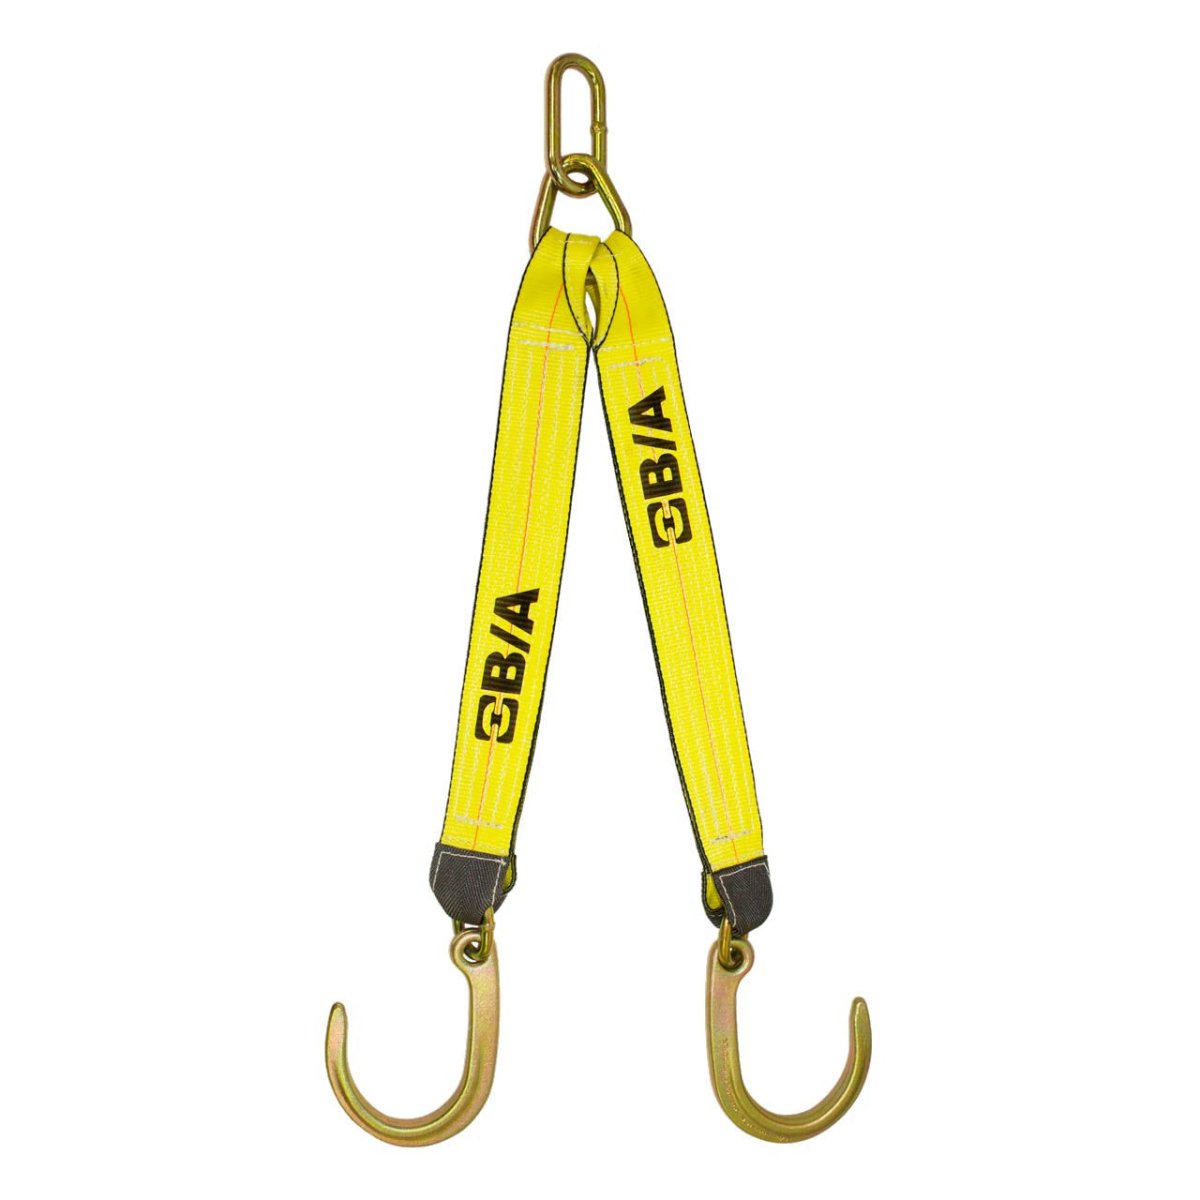 B/A Products Co. Low-Profile 8" J Hook V-Strap Legs - starequipmentsales